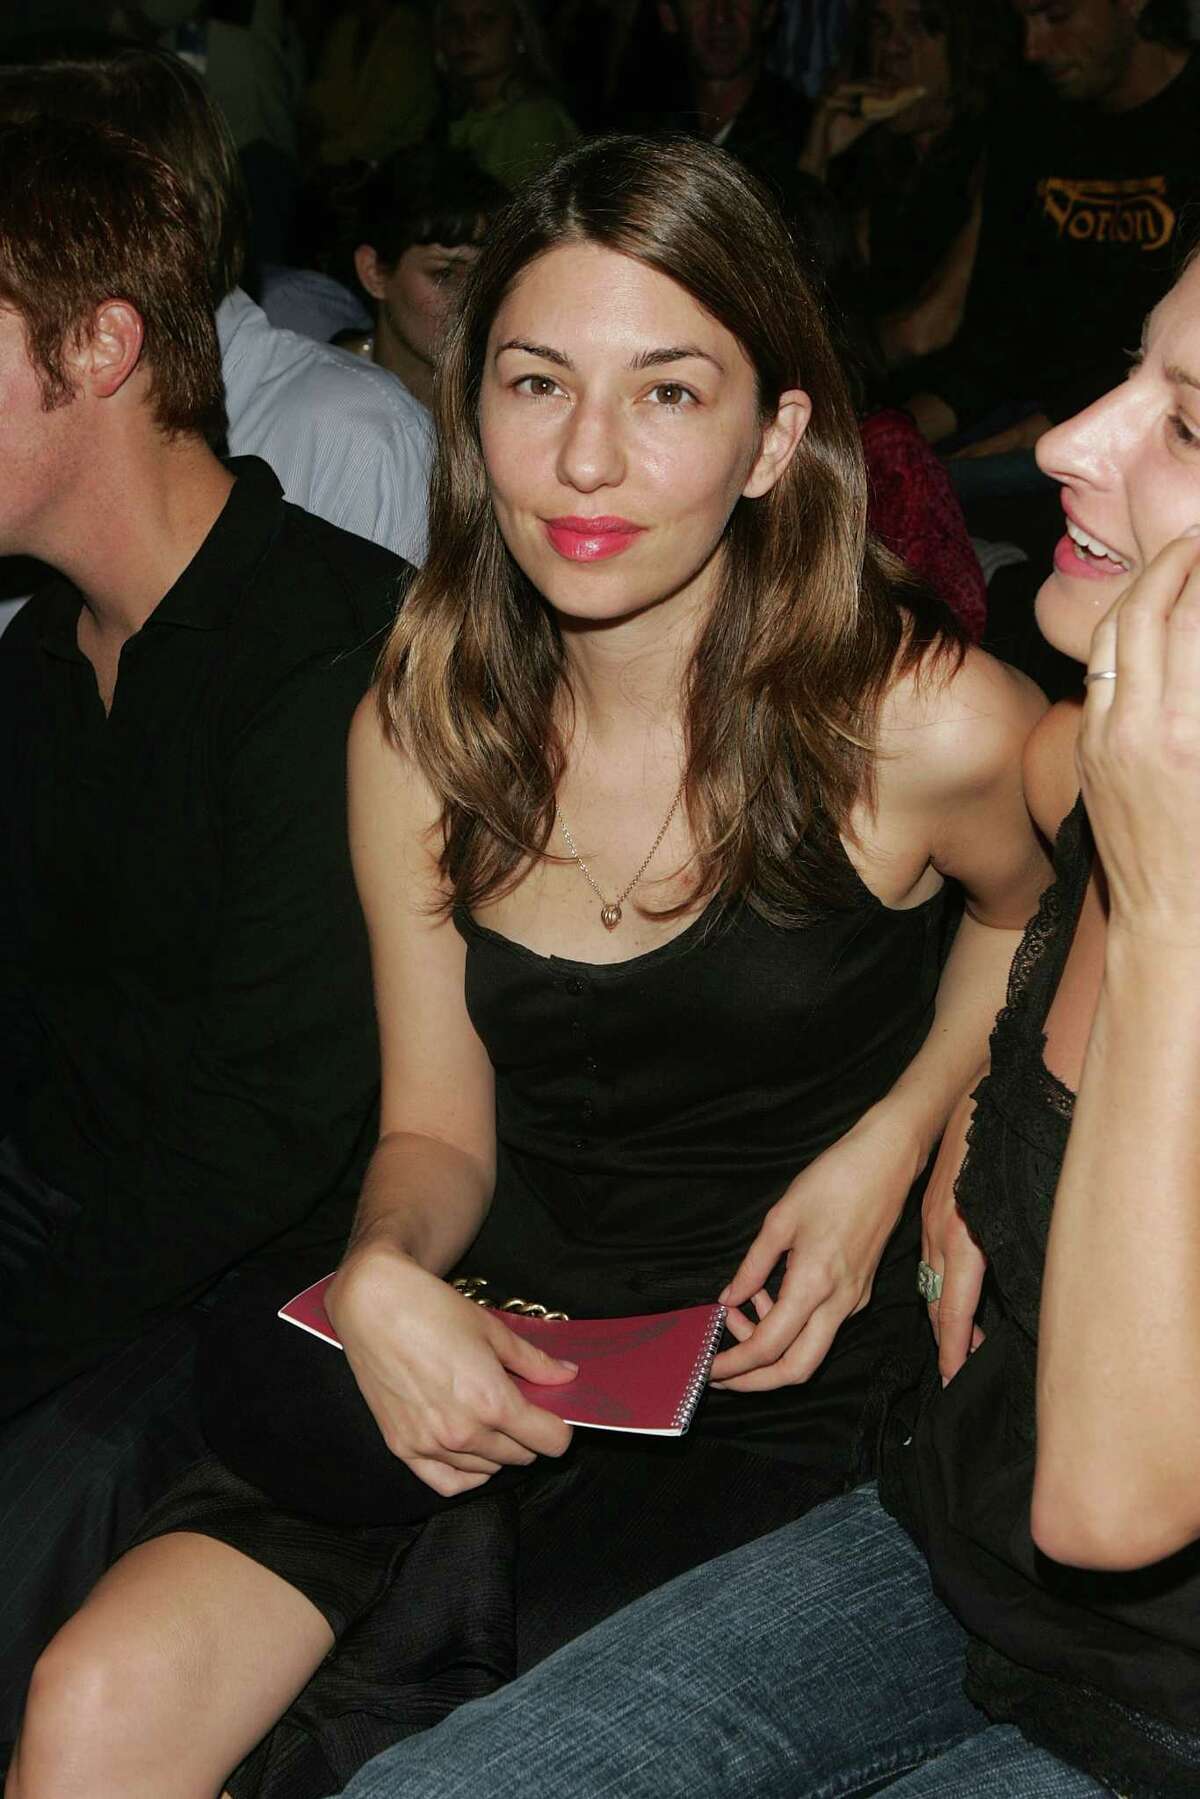 NEW YORK - SEPTEMBER 14: Director Sophia Coppola in the front row at the Anna Sui Spring 2006 fashion show during Olympus Fashion Week at Bryant Park on September 14, 2005 in New York City. (Photo by Peter Kramer/Getty Images) *** Local Caption *** Sophia Coppola